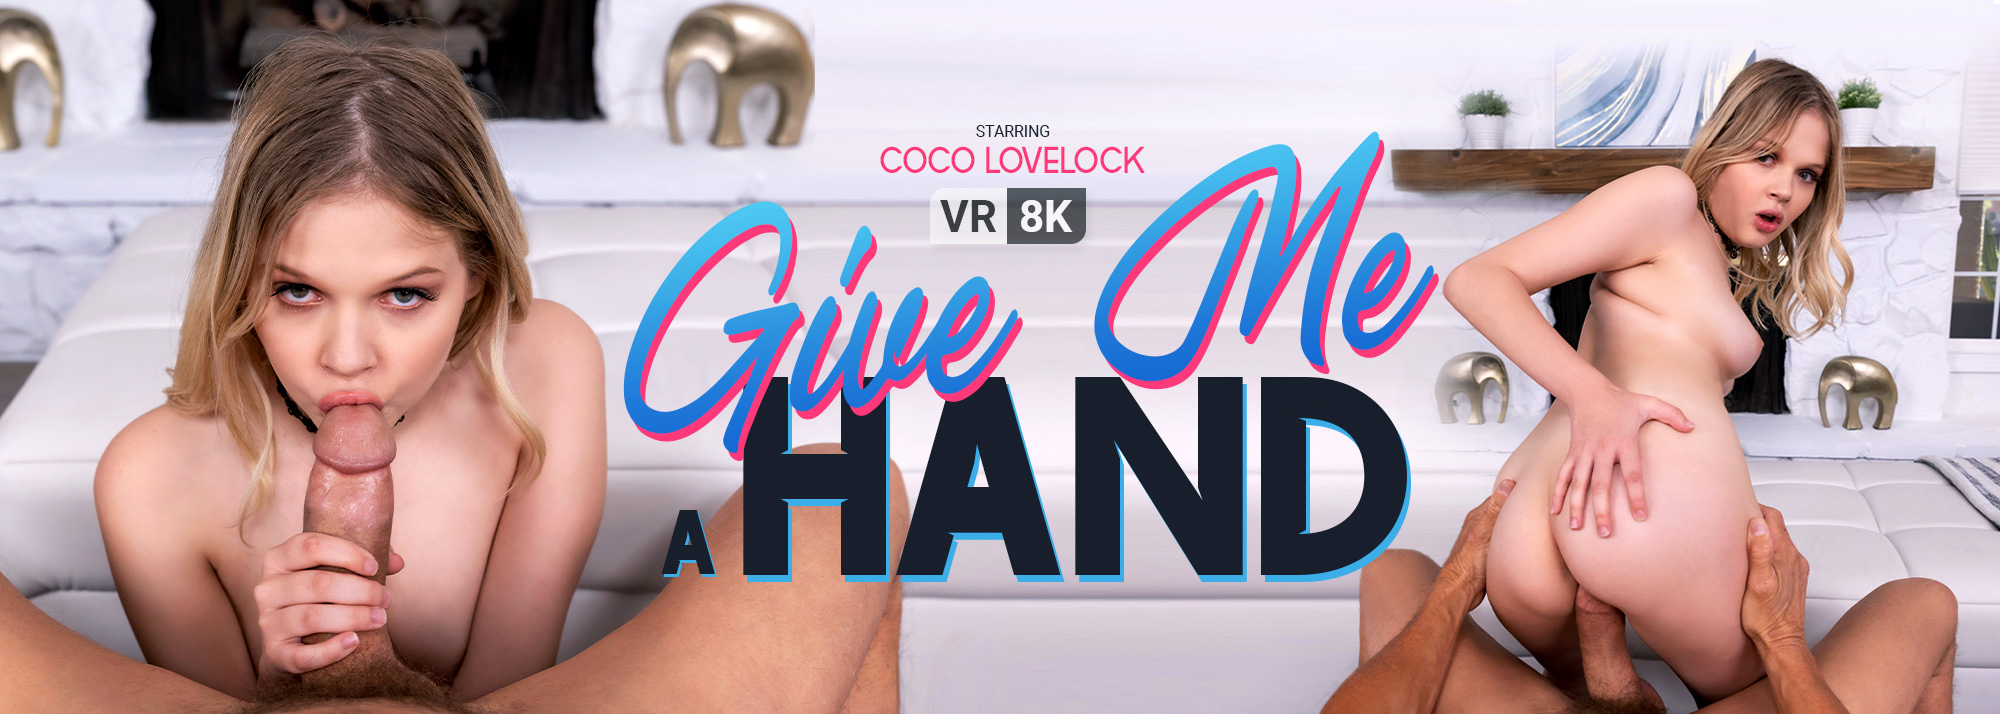 Give Me a Hand with Coco Lovelock  Slideshow